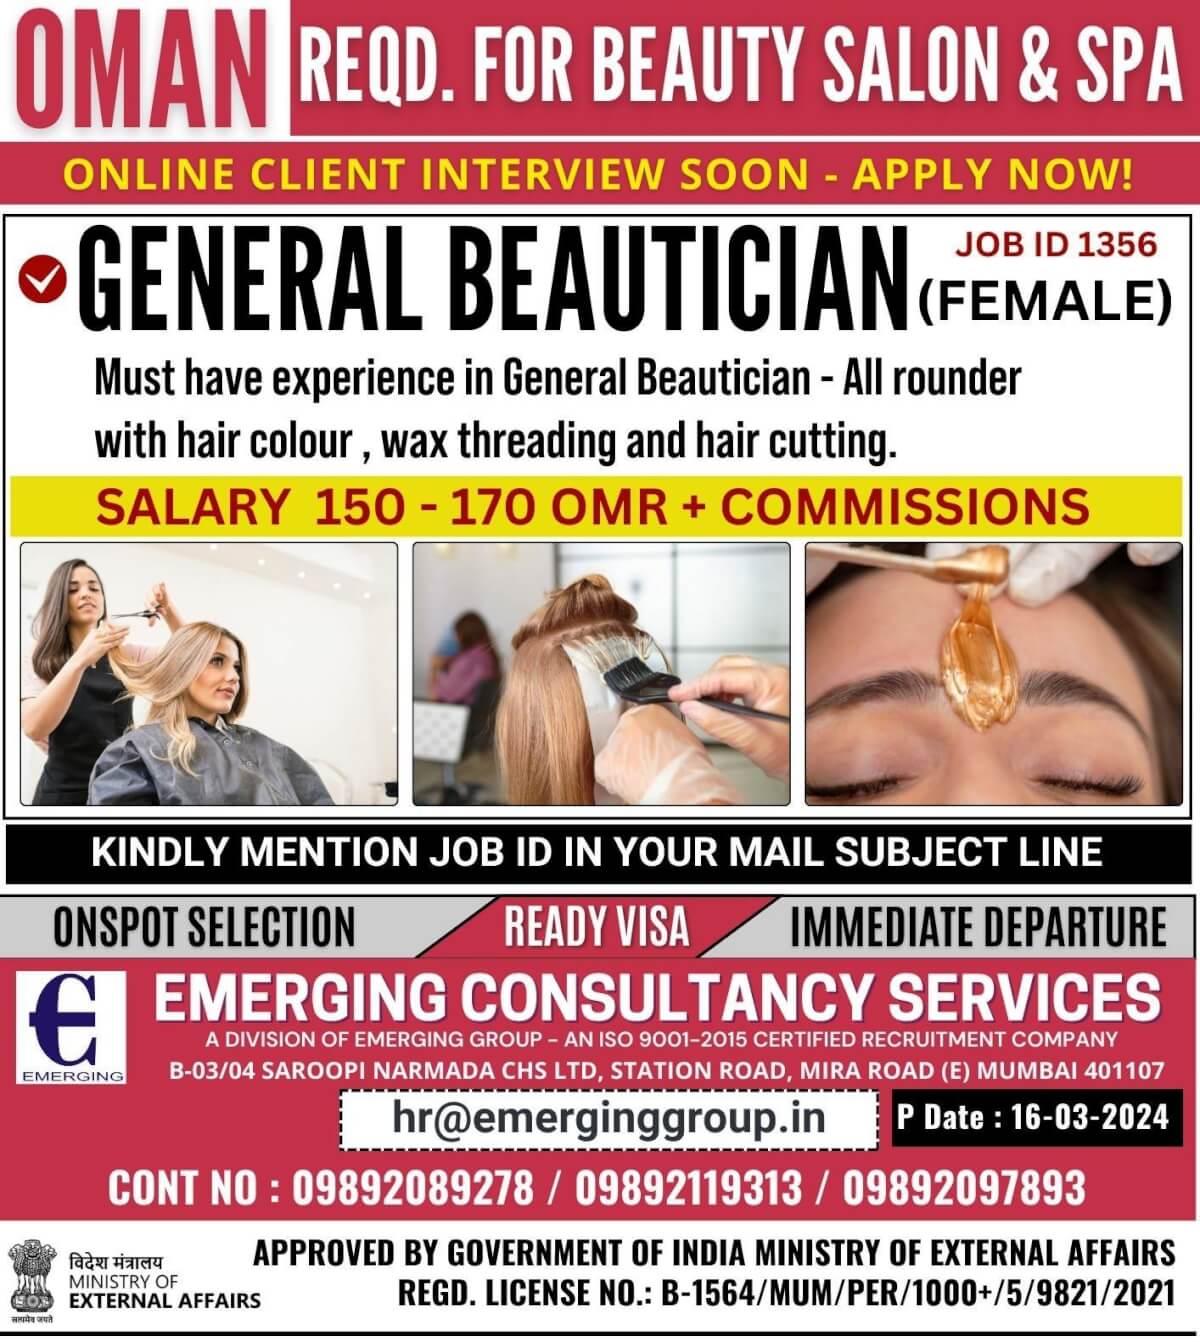 REQD. FOR Beauty Salon & Spa IN OMAN - ONLINE CLIENT INTERVIEW SOON - APPLY NOW!